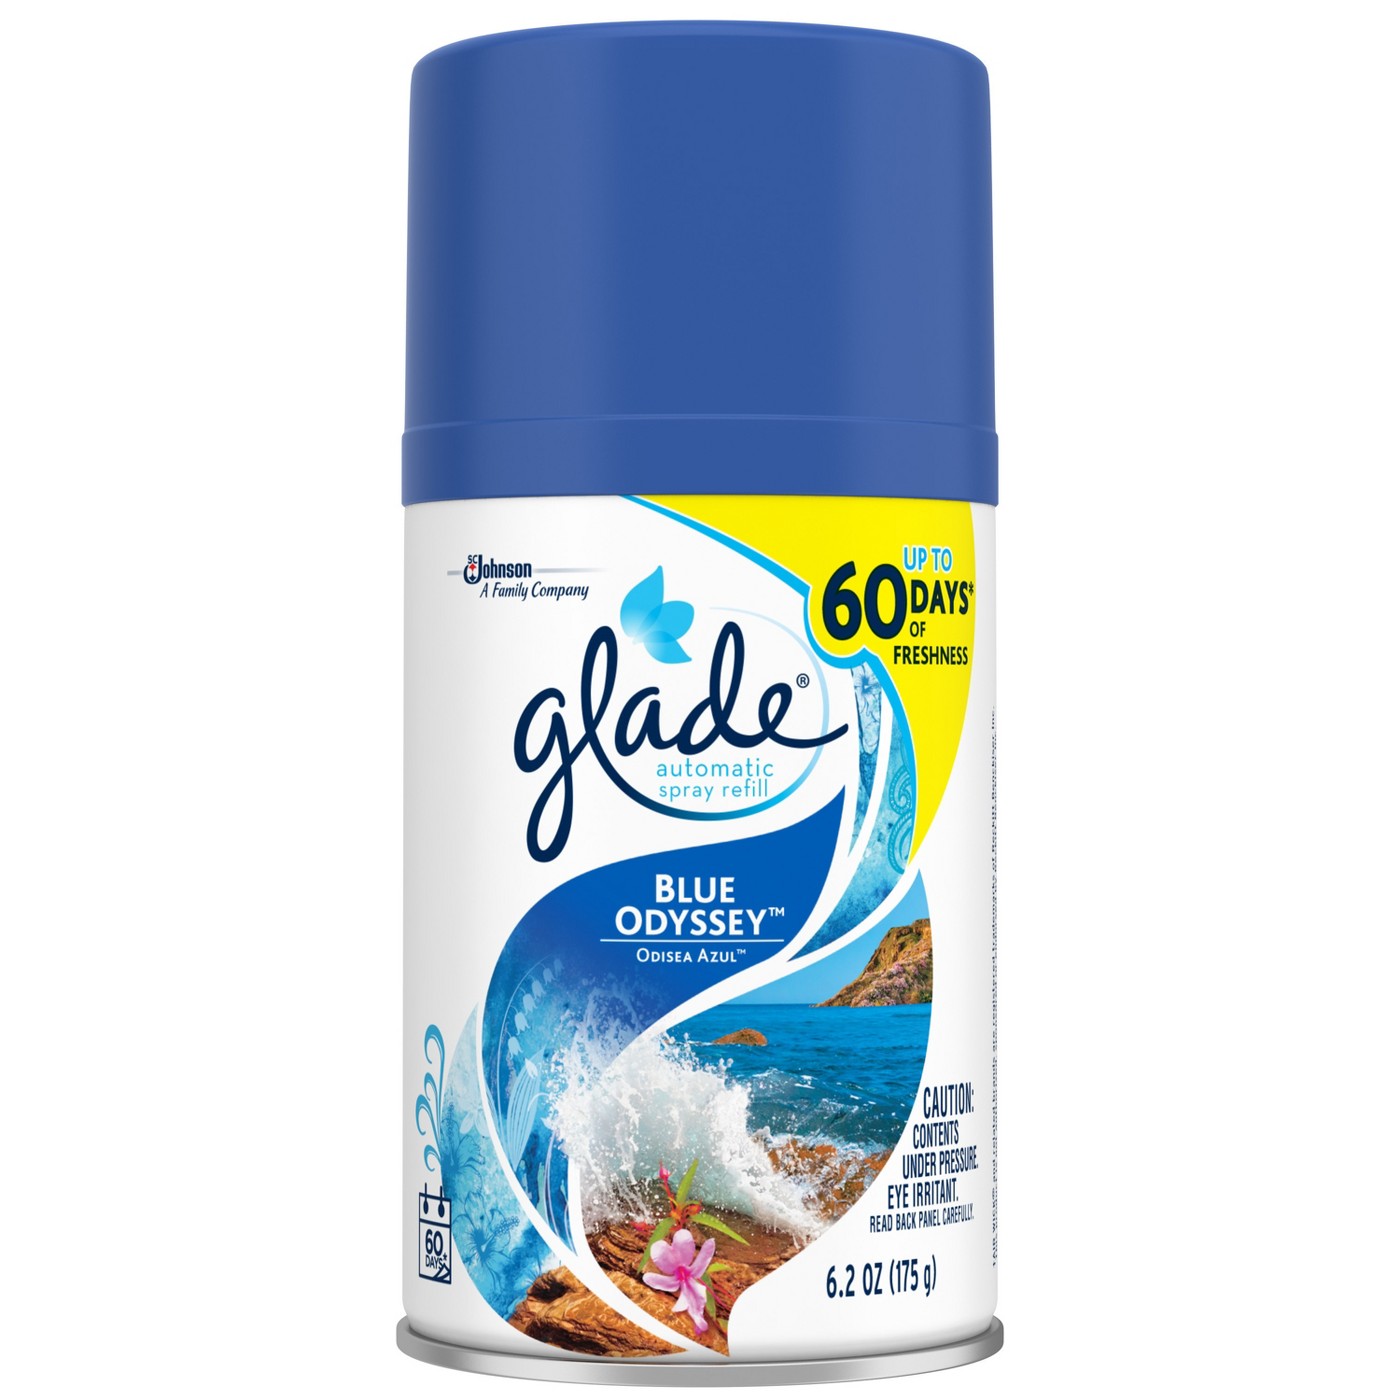 NEW GLADE COUPONS (PRINT NOW)